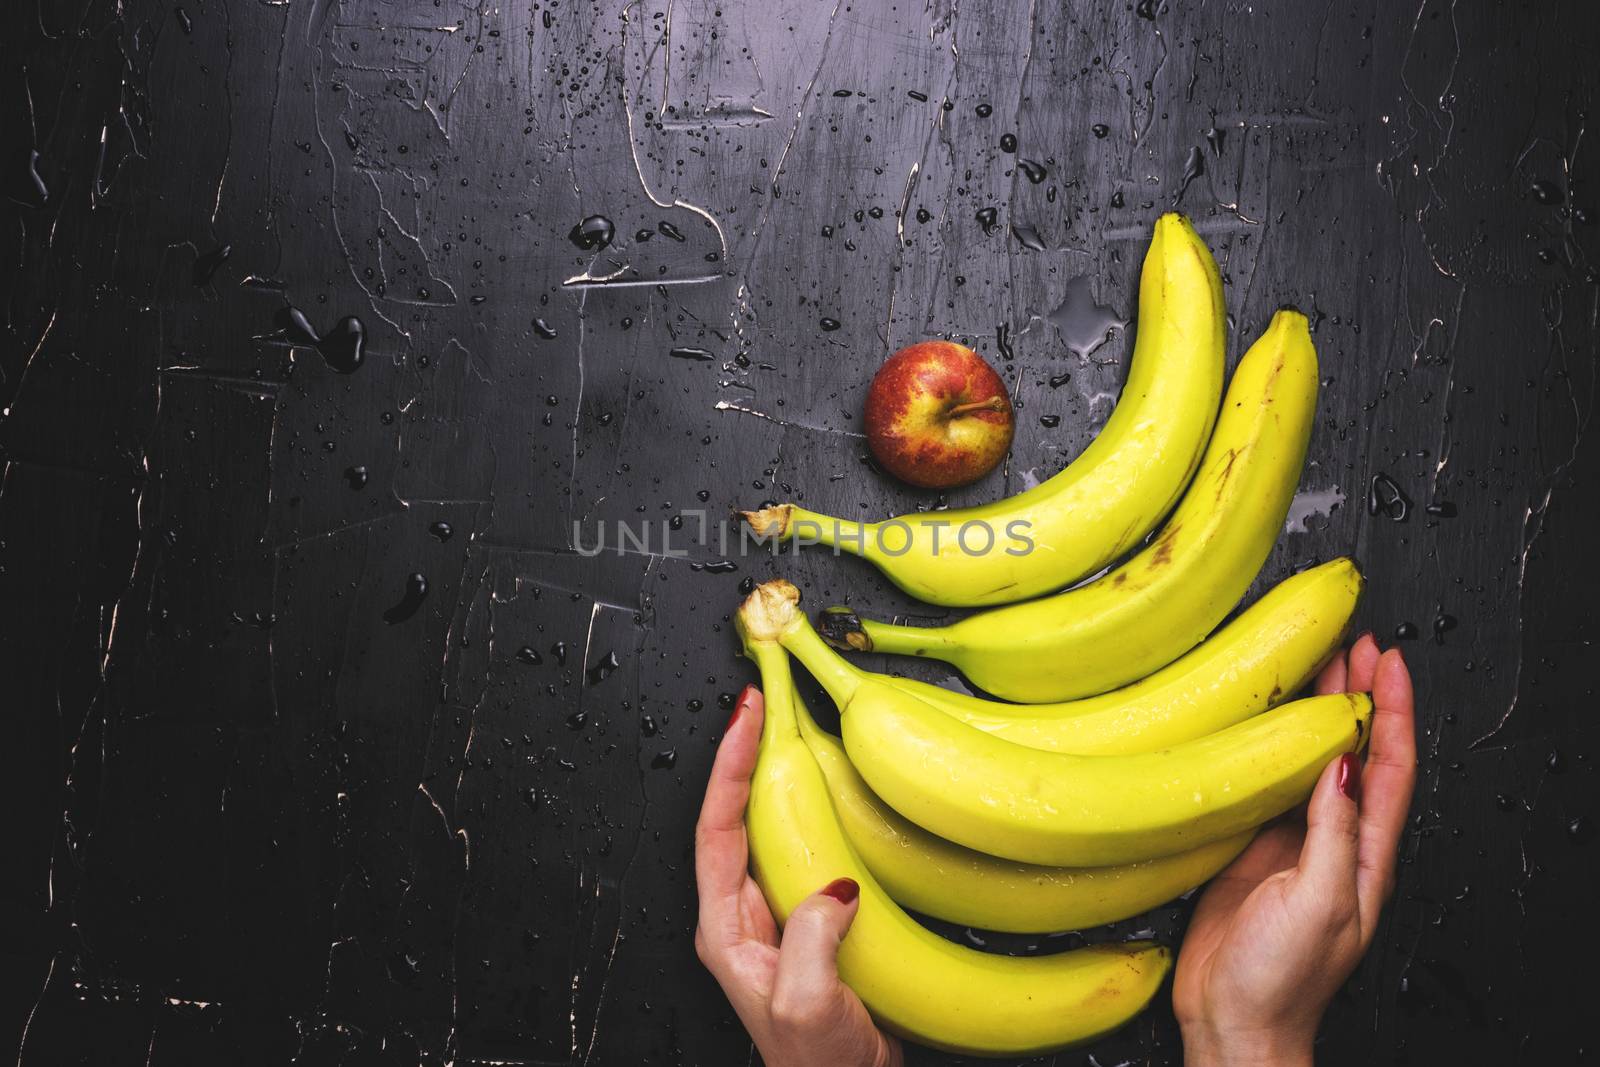 She lays out the apples and bananas on a dark background